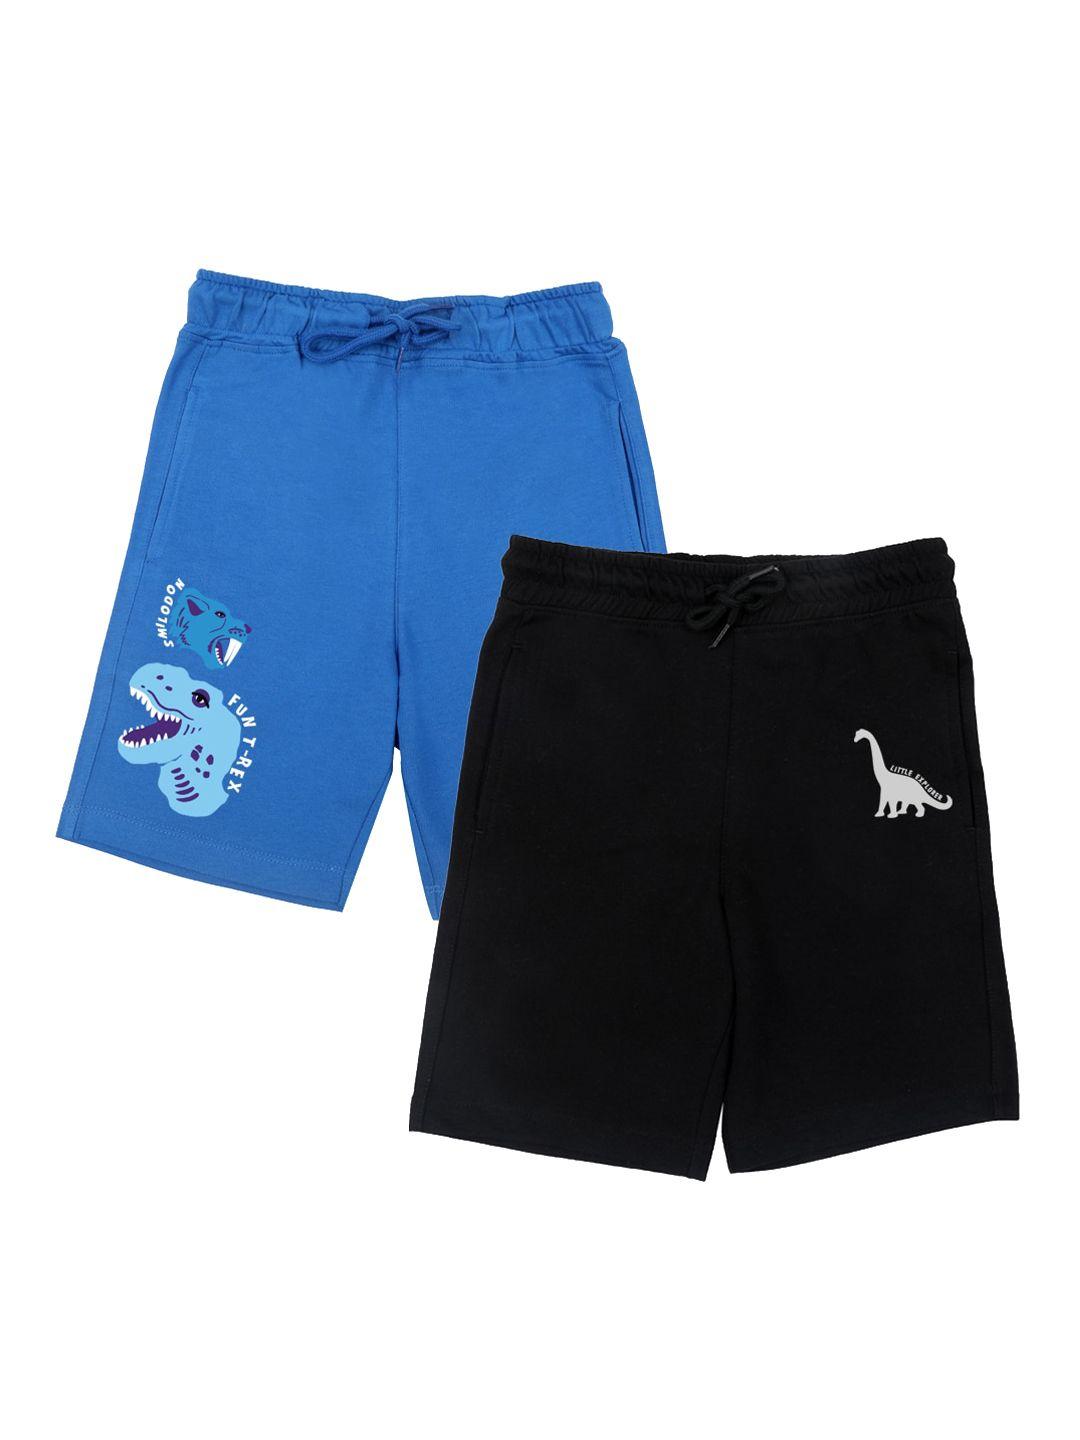 yk boys pack of 2 printed casual shorts